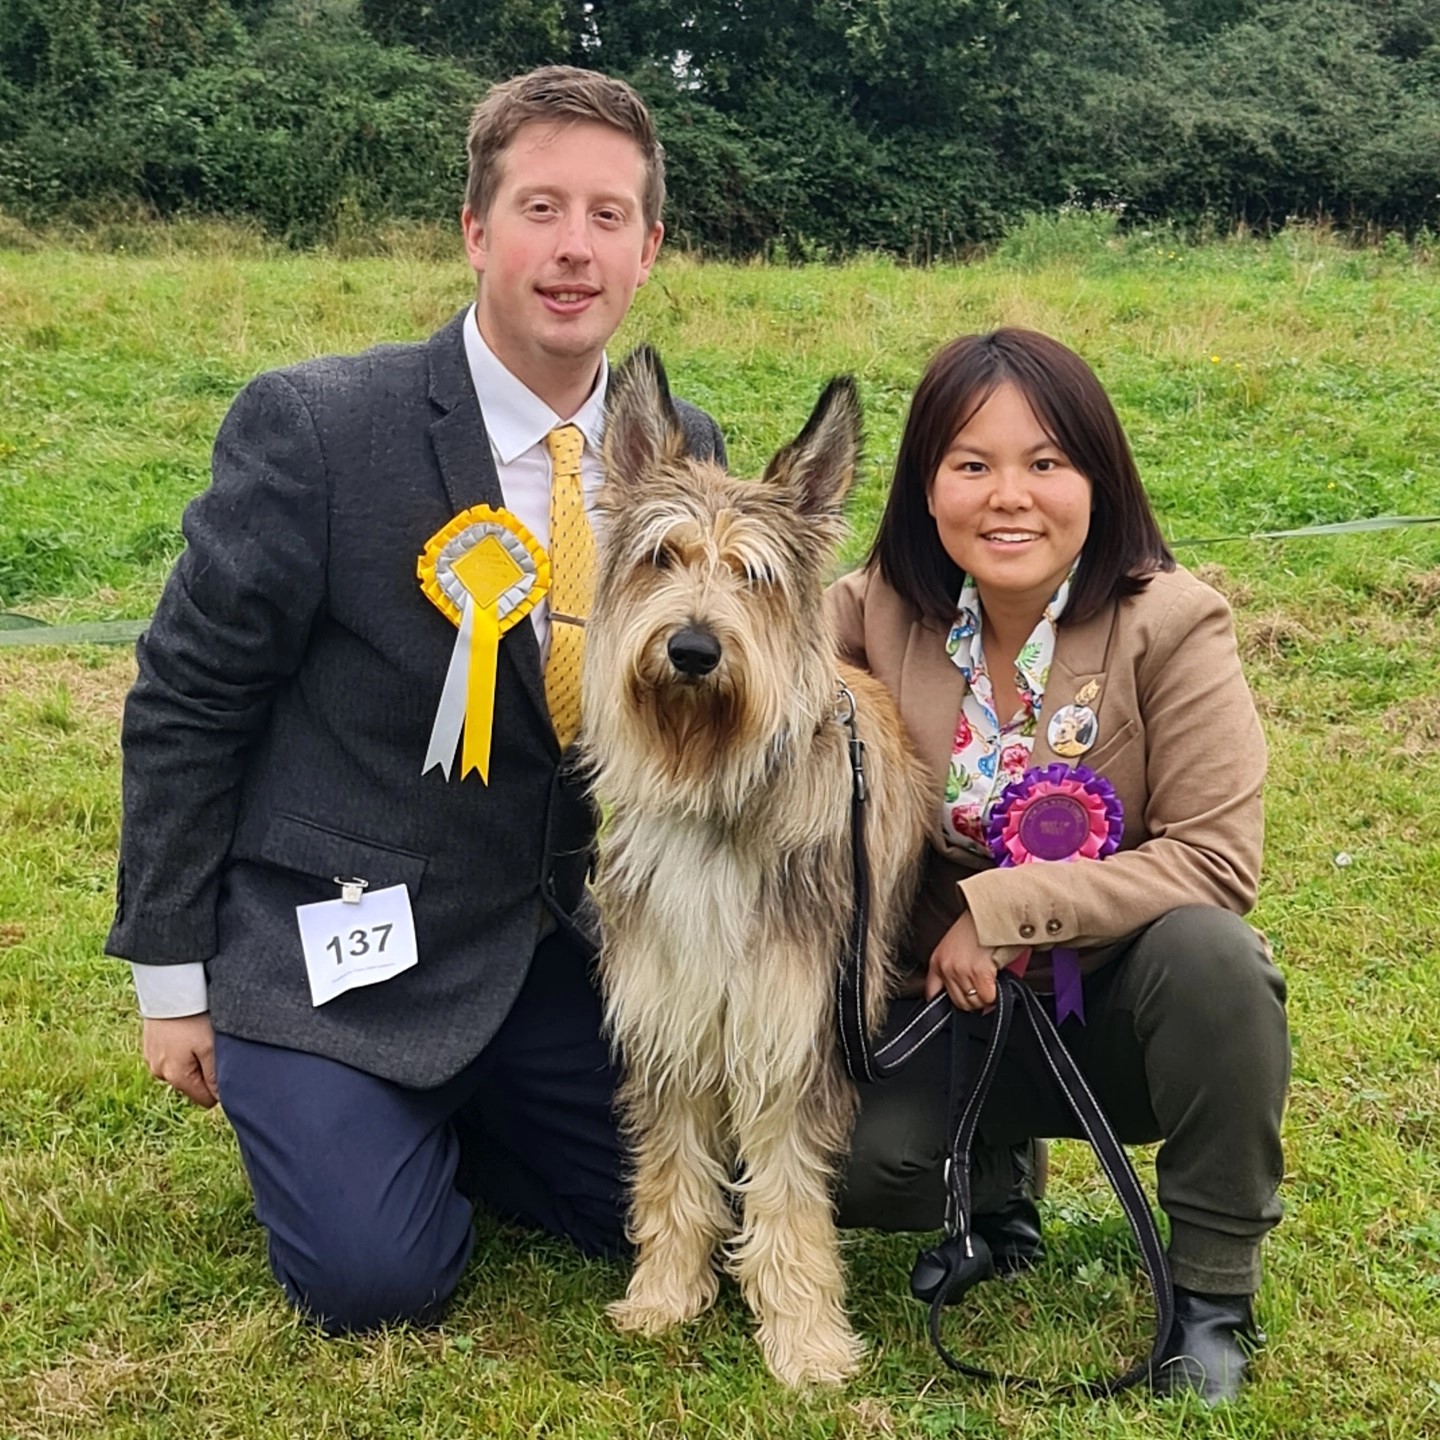 Picardy Sheepdog / Berger Picard at South West Essex Canine Association (SWECA) Open Show